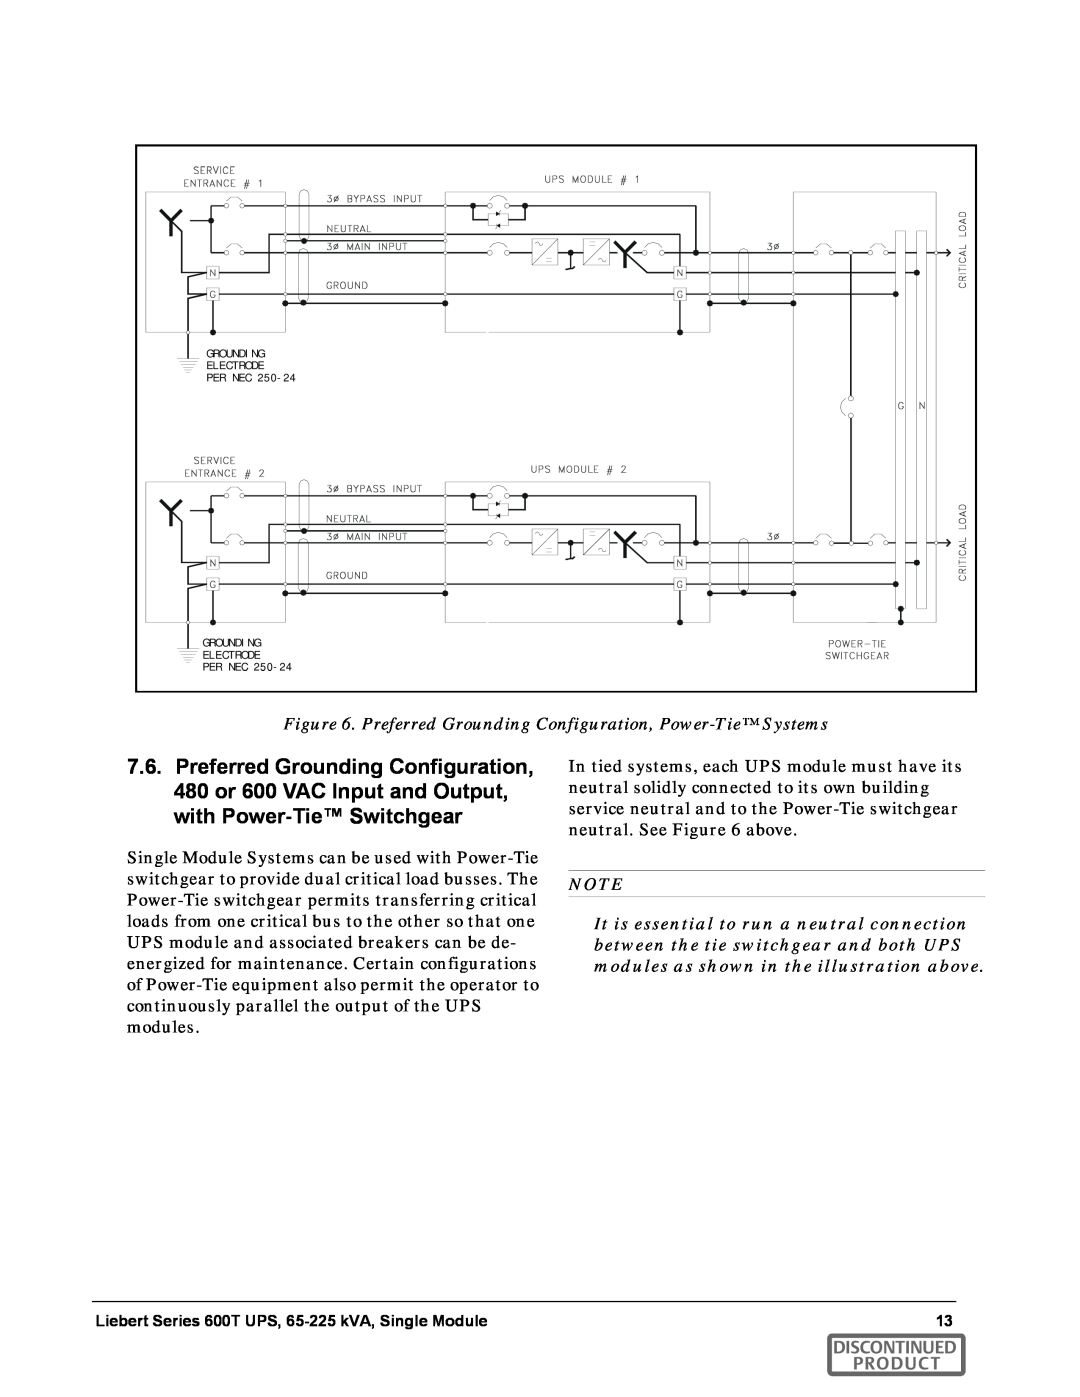 Emerson SERIES 600T manual Preferred Grounding Configuration, Power-Tie Systems, Product 